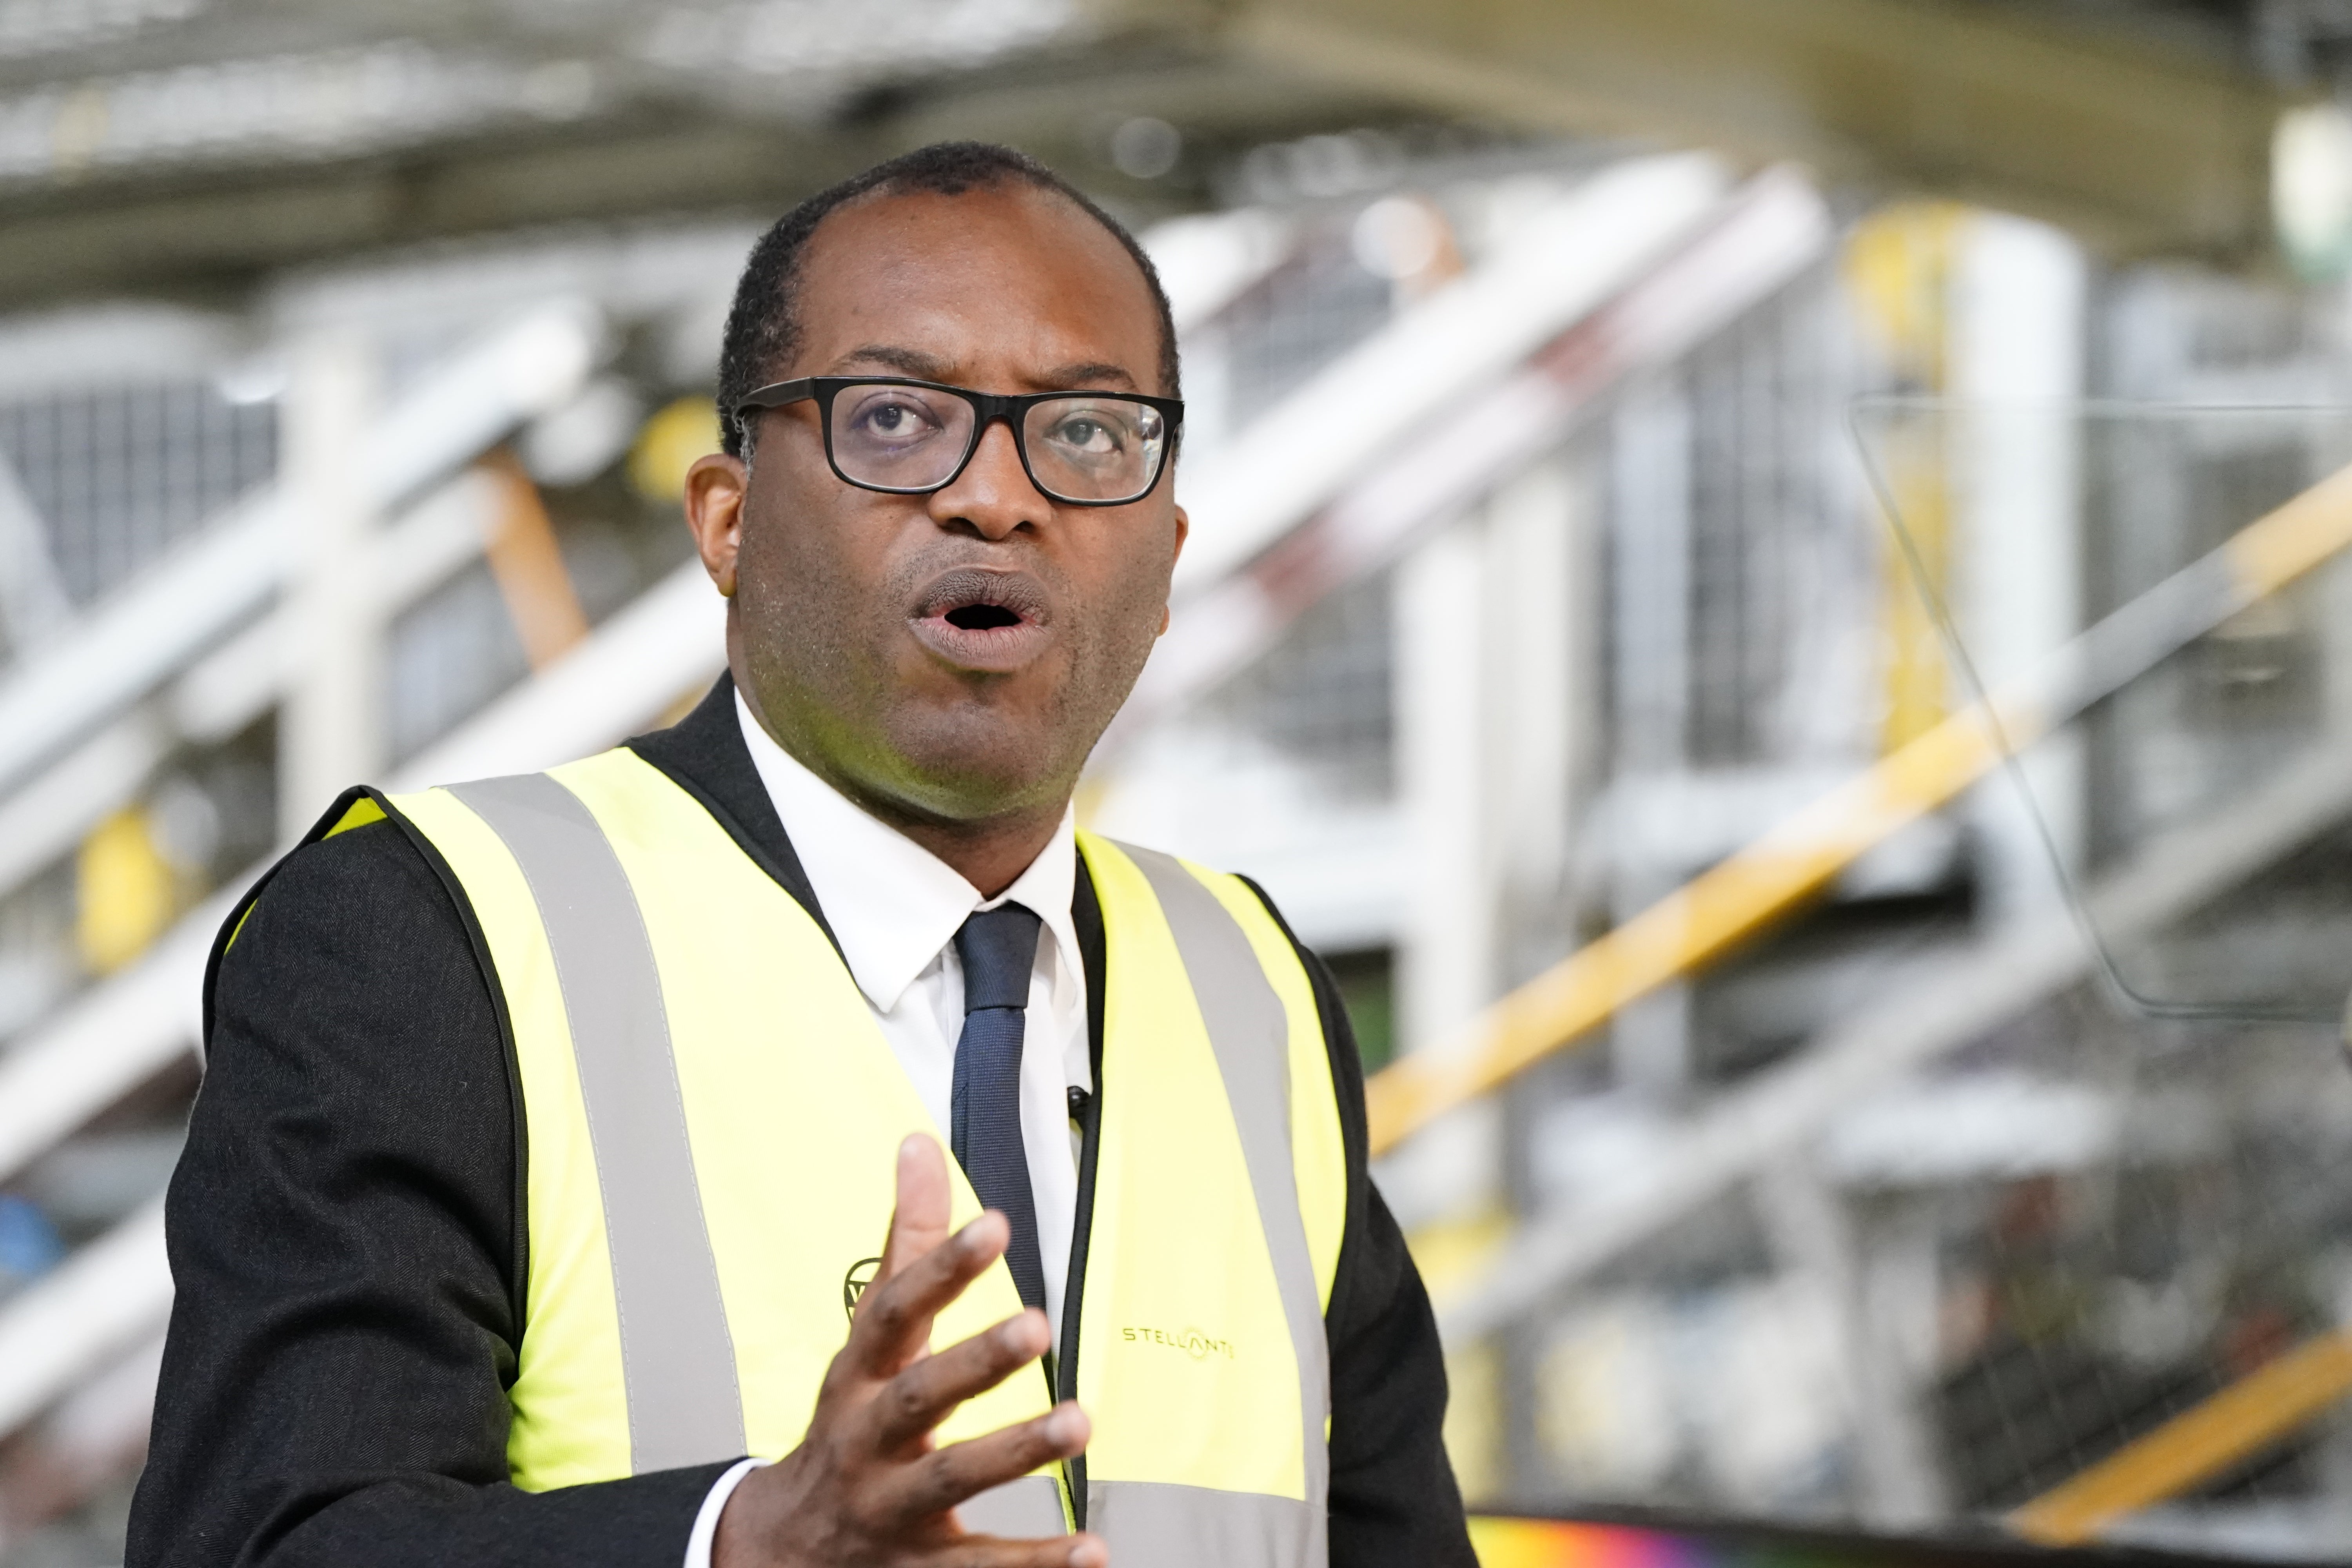 Business Secretary Kwasi Kwarteng has ordered a Competition and Markets Authority inquiry into the proposed acquisition of Ultra Electronics by Cobham Group to assess any national security concerns (Peter Byrne/PA)